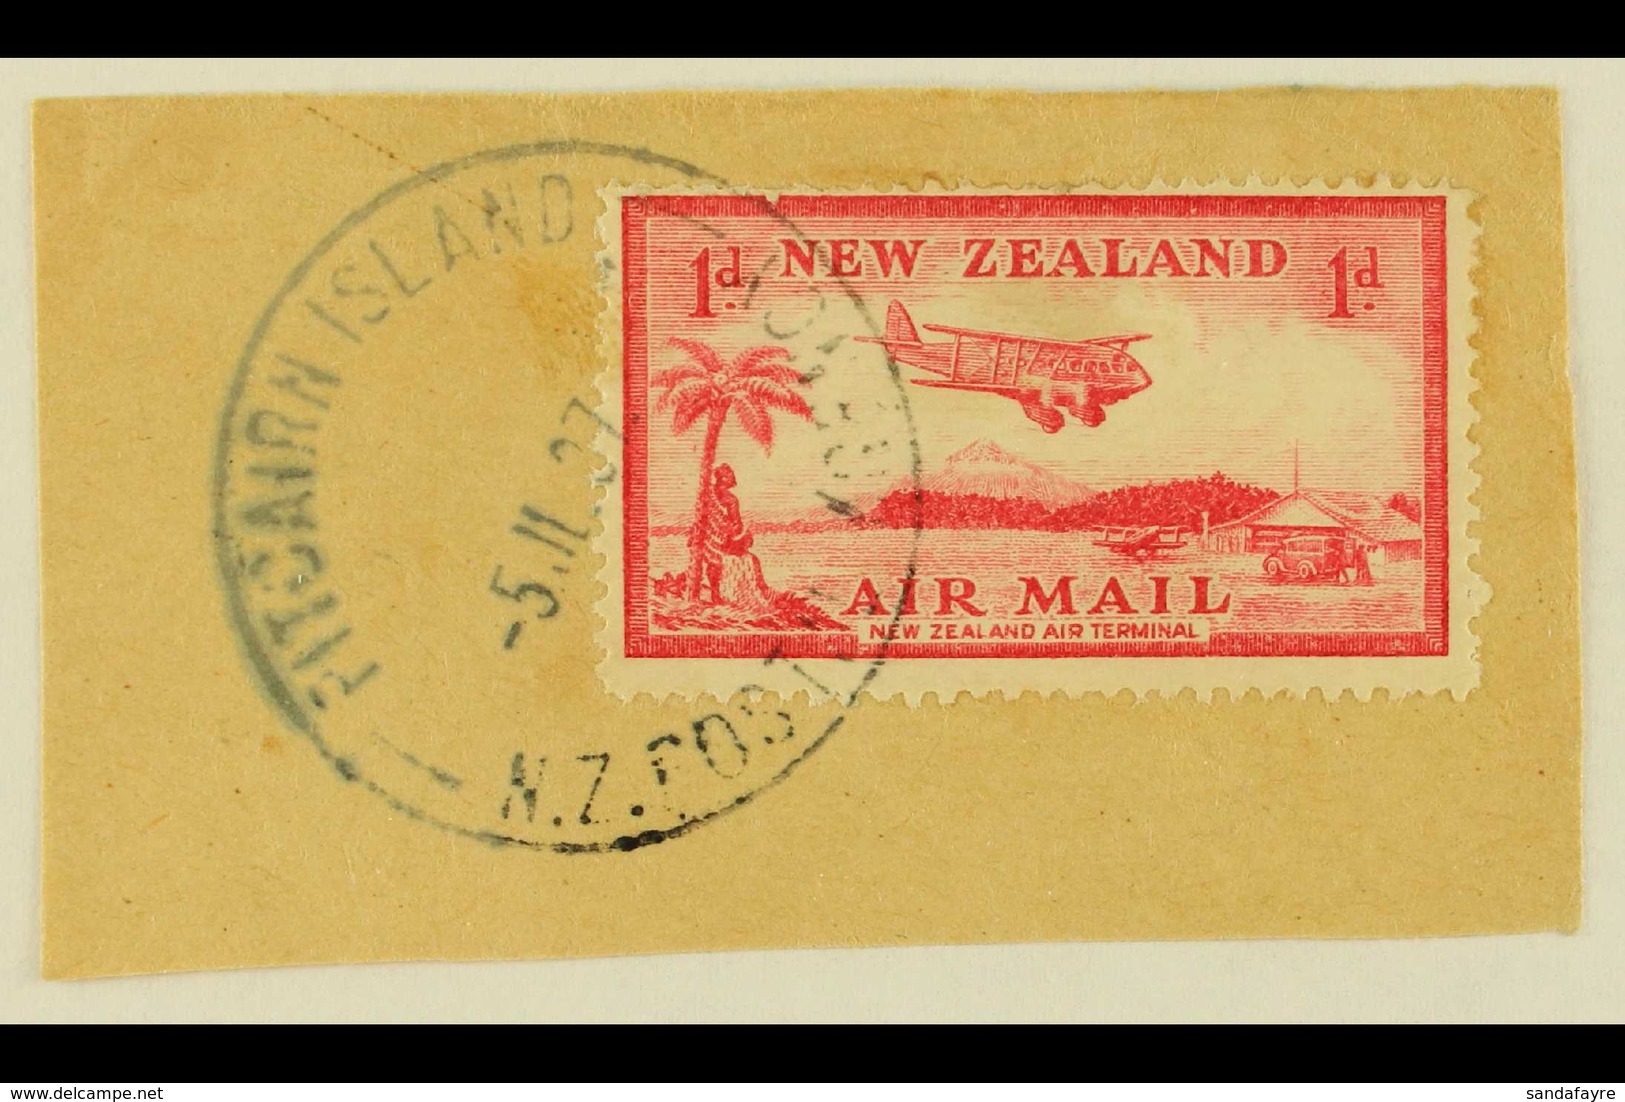 1937  1d Carmine Air Stamp Of New Zealand, SG 570, On Piece Tied By Fine Full "PITCAIRN ISLAND" Cds Cancel Of 5 JL 37, U - Pitcairneilanden